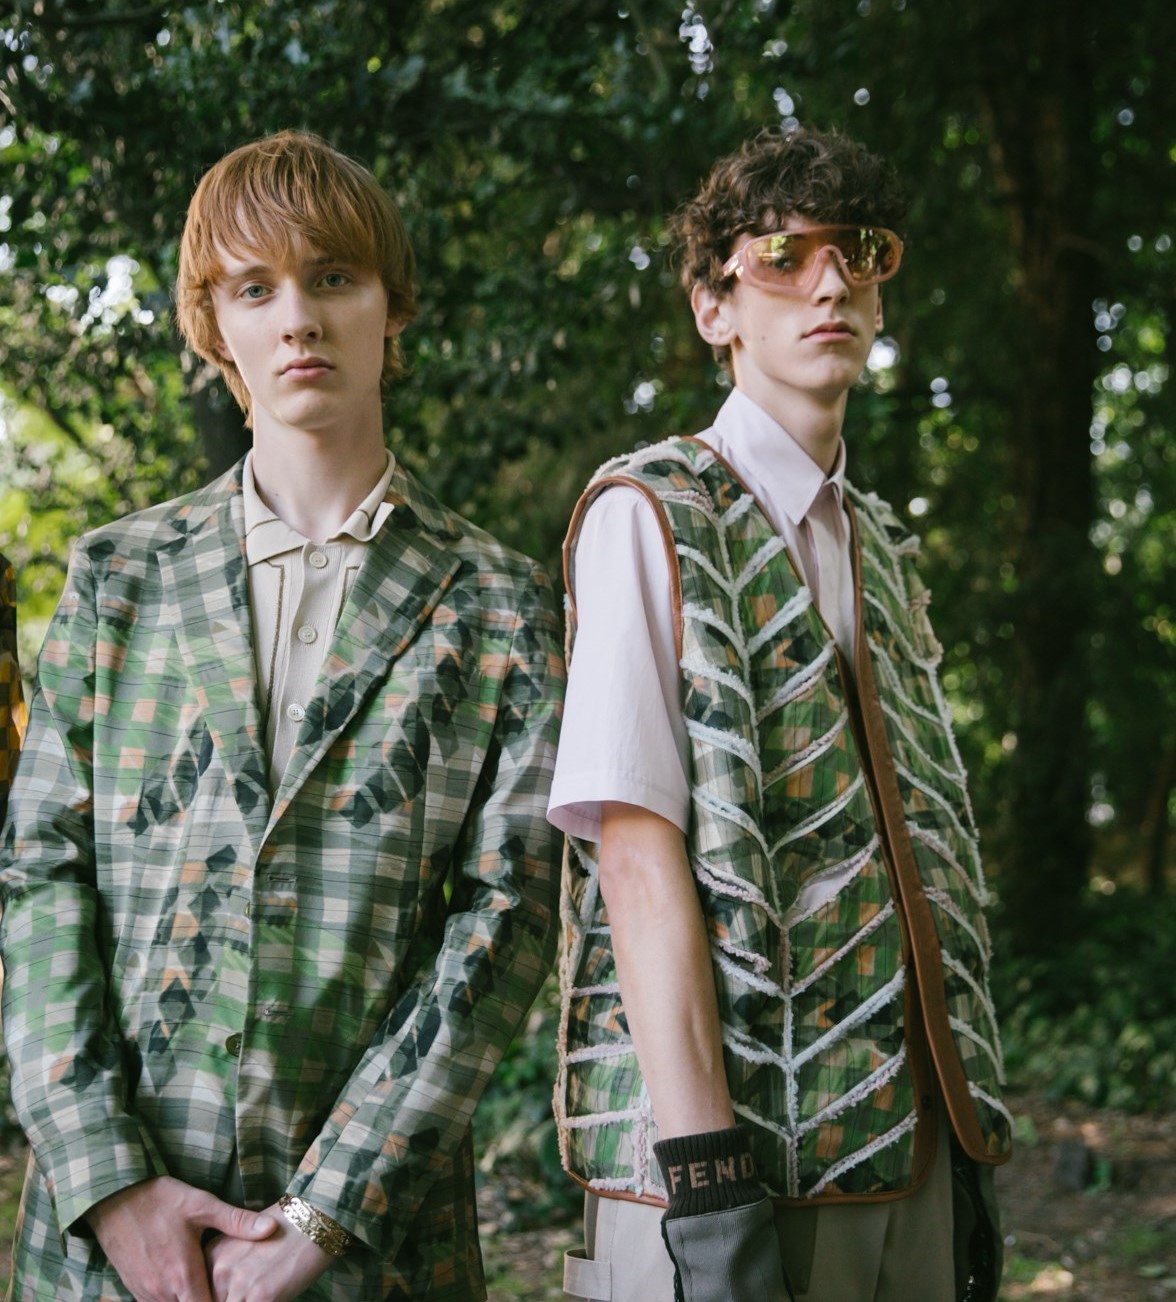 The Menswear Shows Were All About Horticulture – But Why?